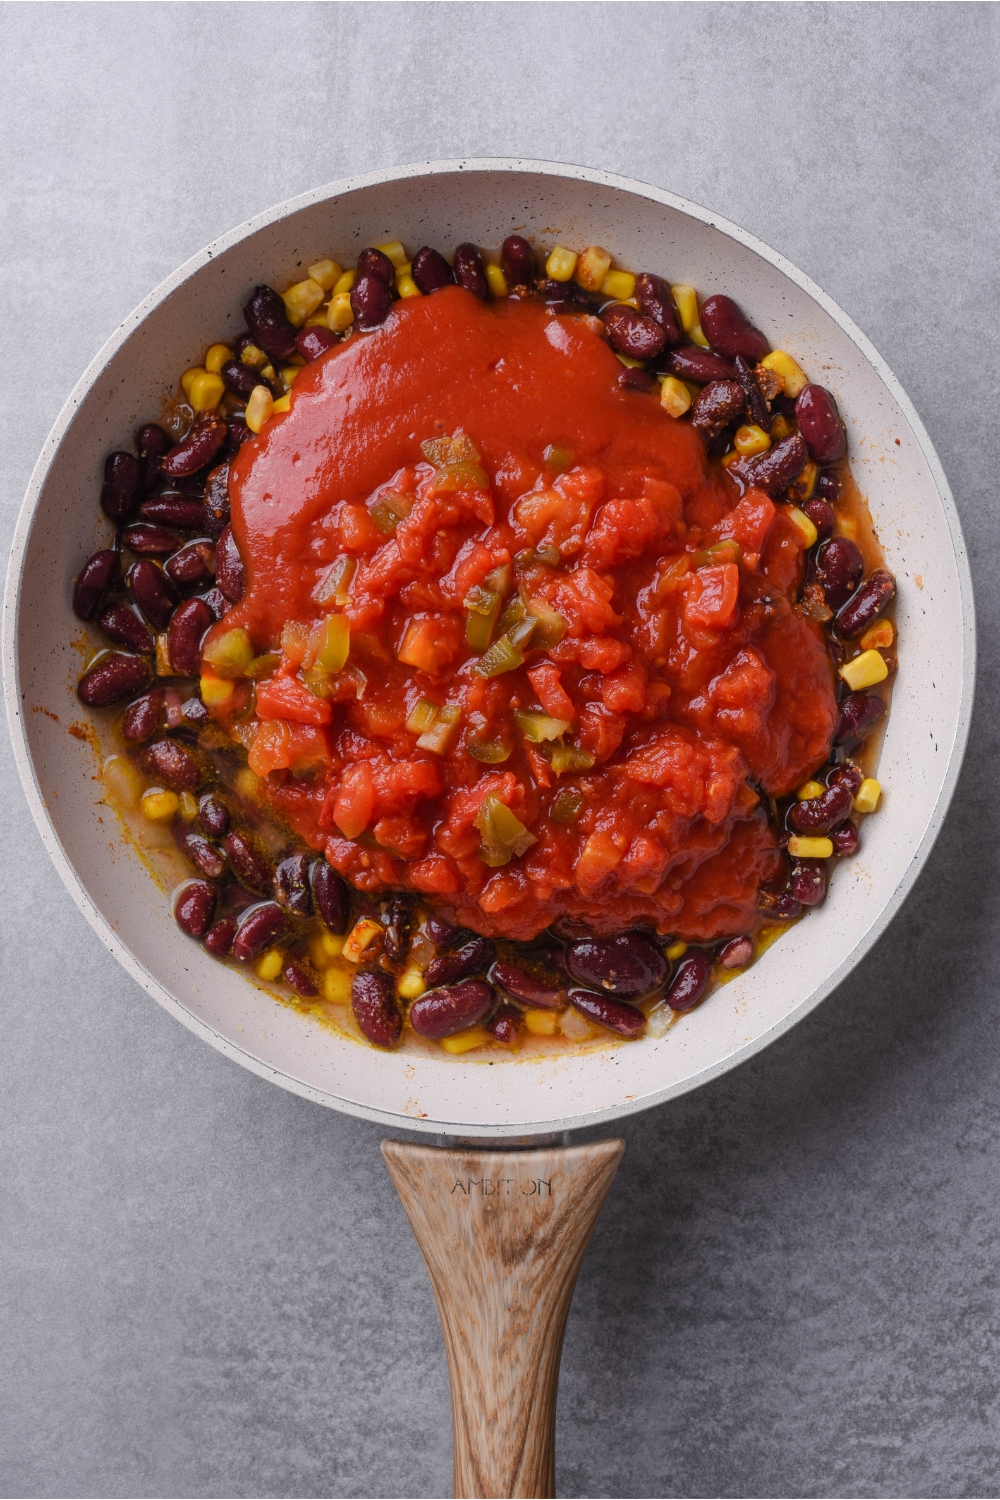 Grey skillet filled with black beans, corn, tomato sauce, and diced tomatoes with green chiles.